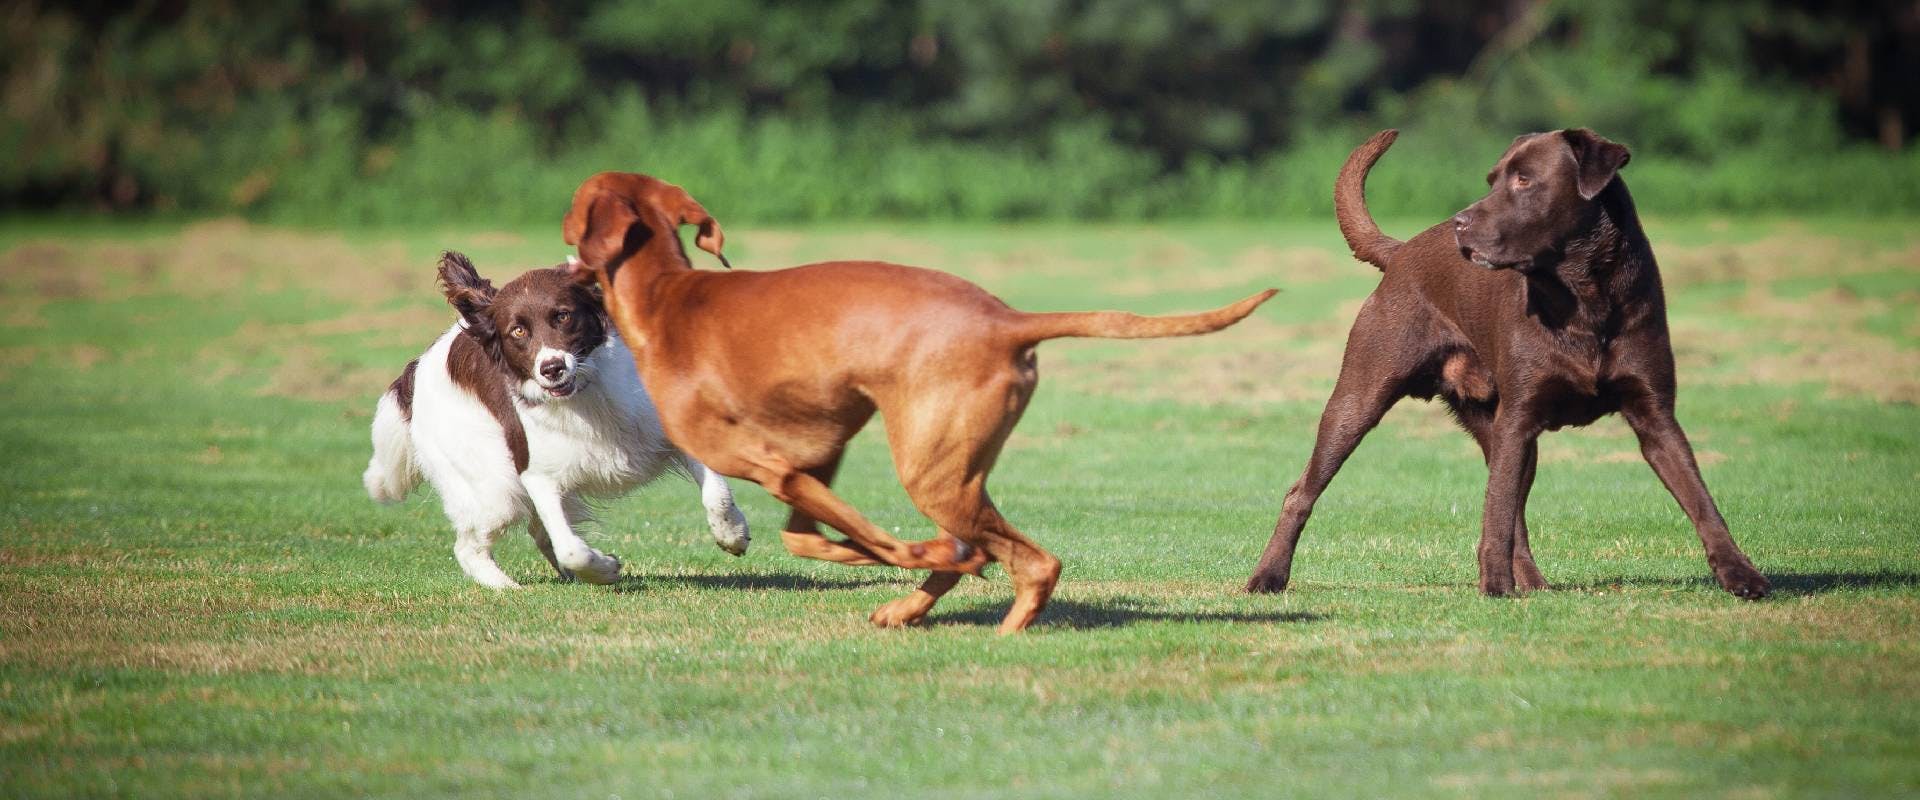 Three dogs playing in a dog park